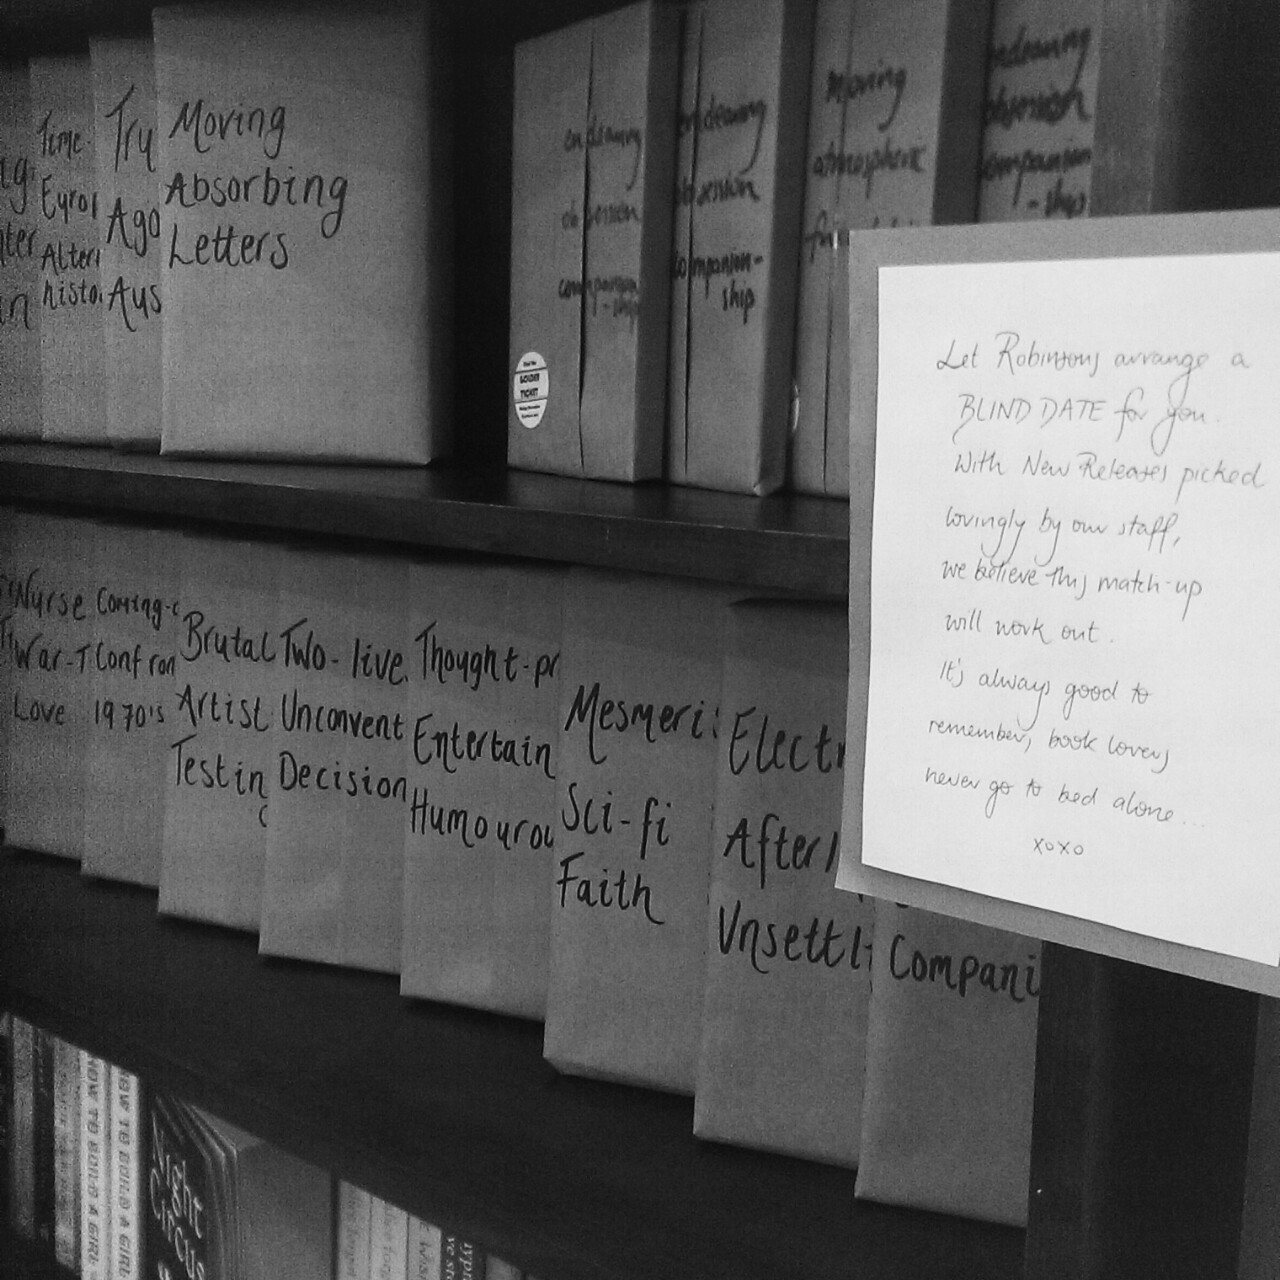 Blind date with a book at Robinson’s bookshop! Daily inspiration. Discover more photos at http://justforbooks.tumblr.com